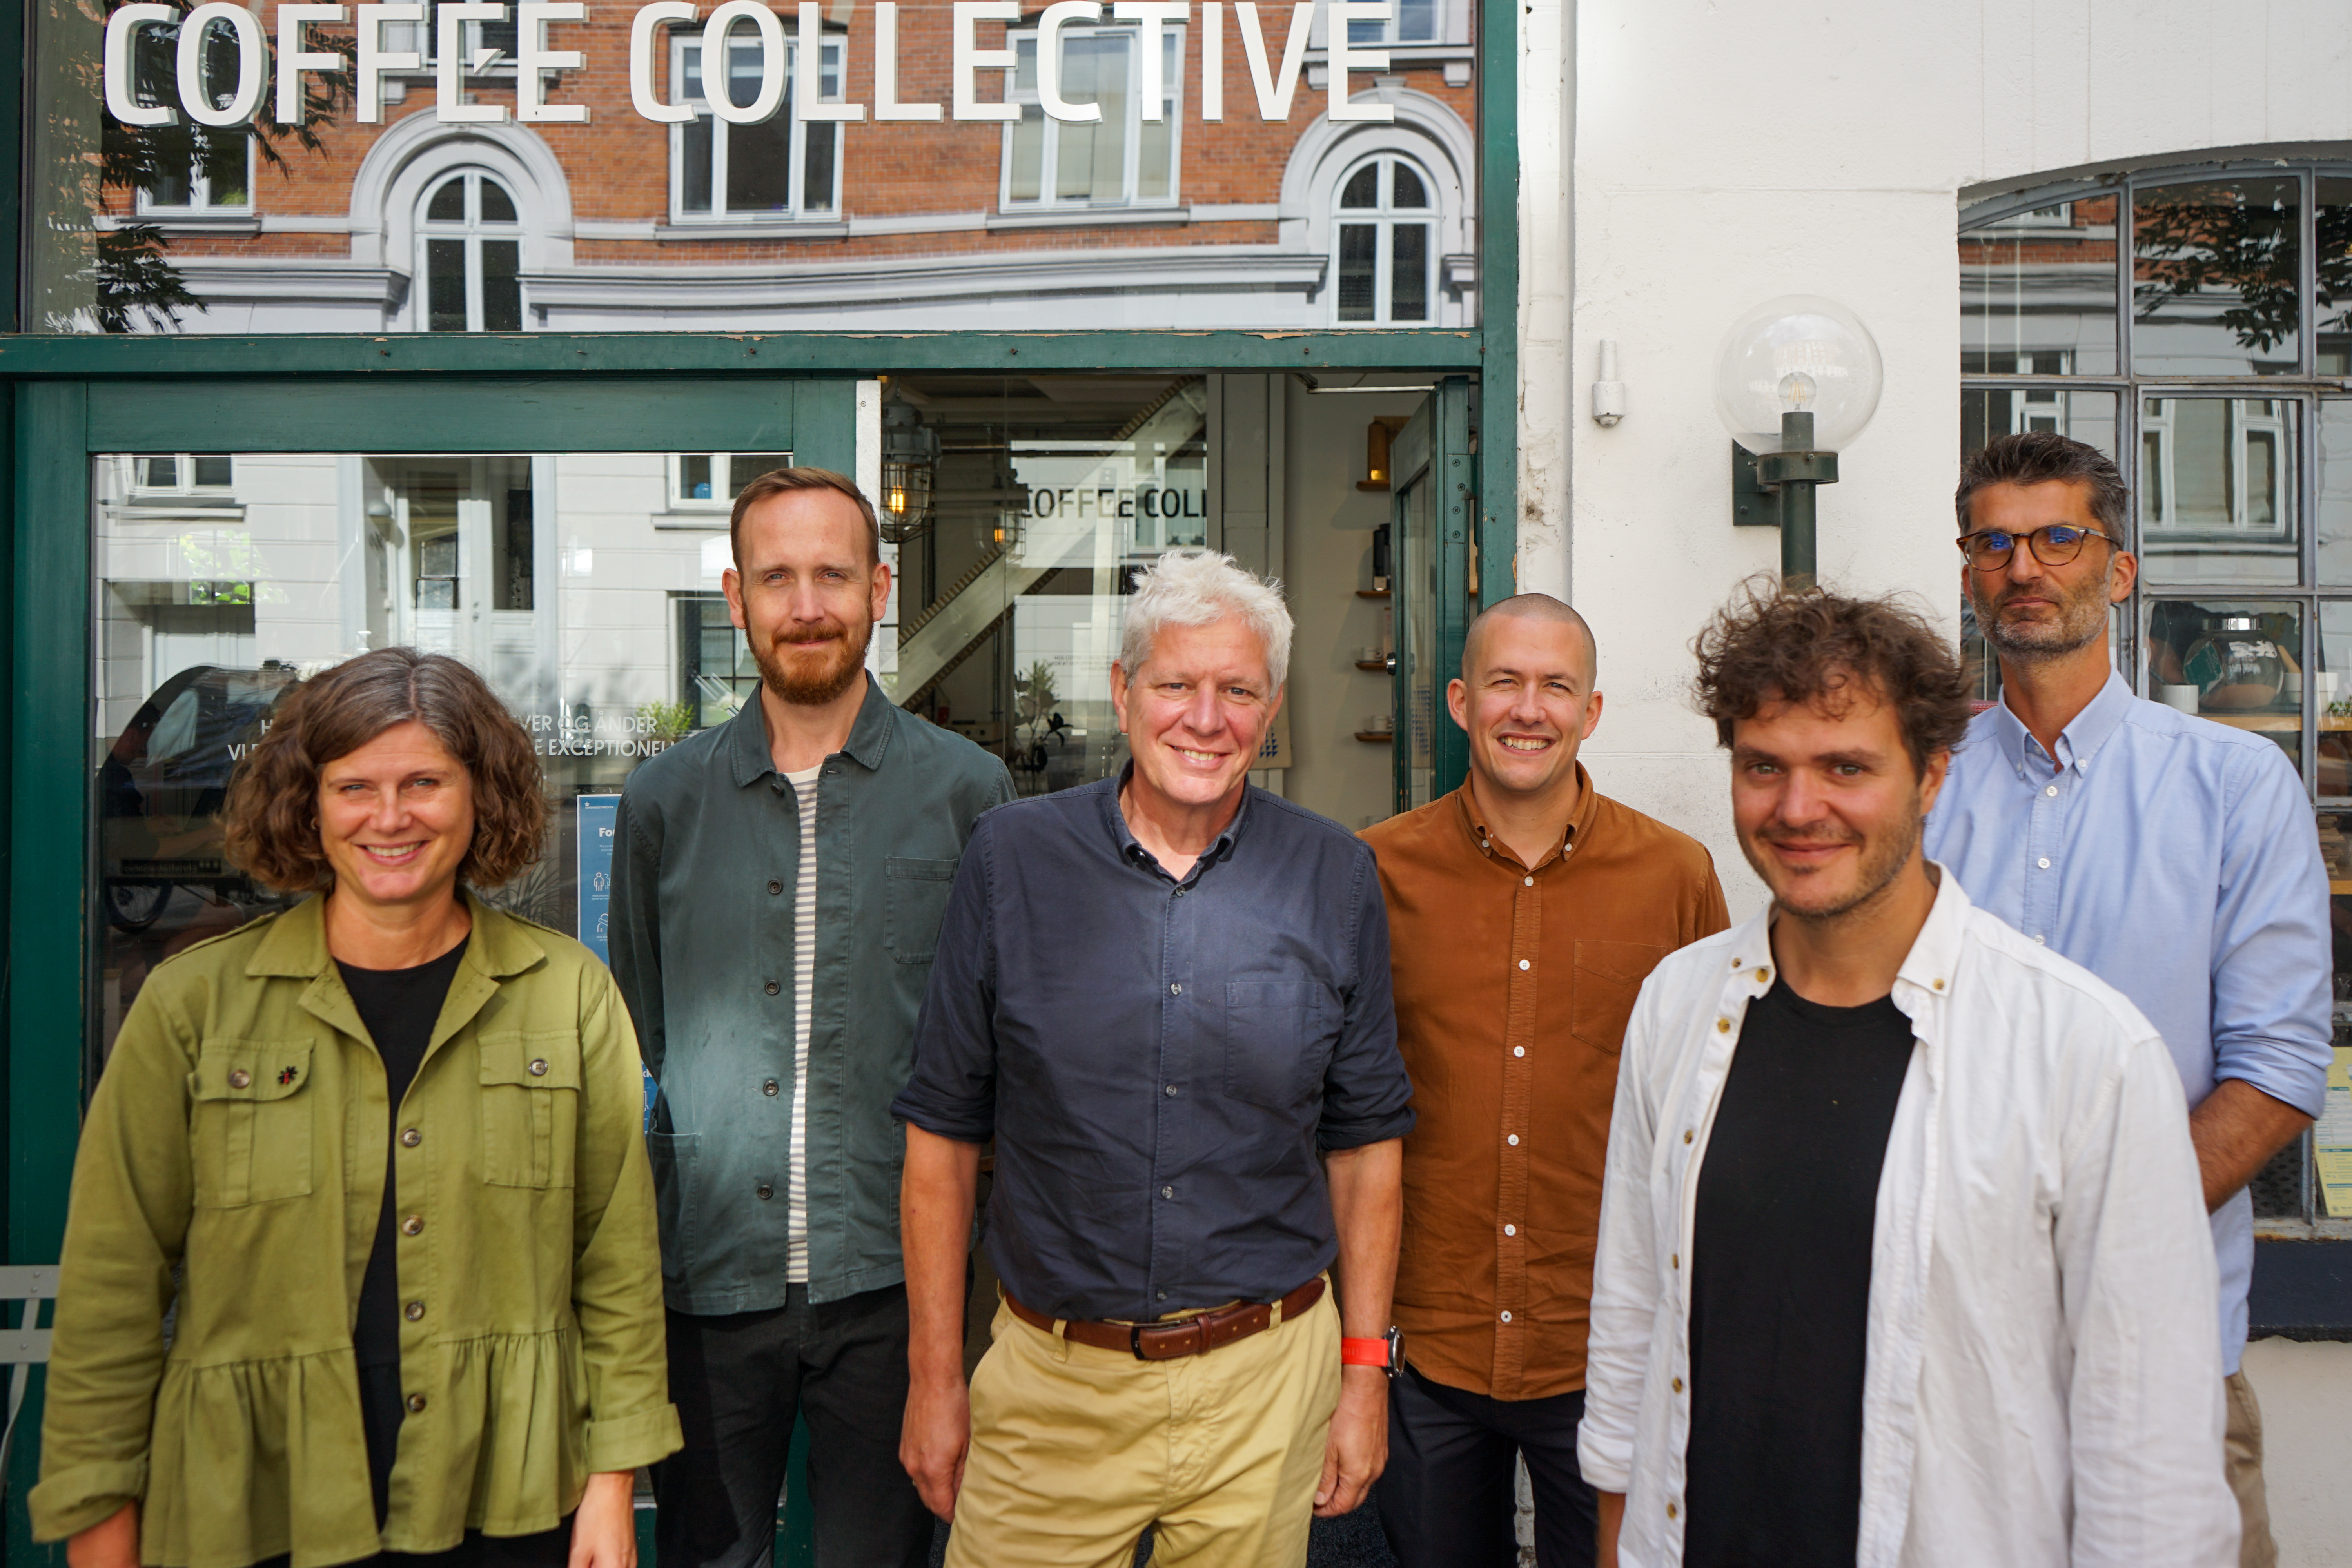 Coffee Collective styrkes med to markante profiler